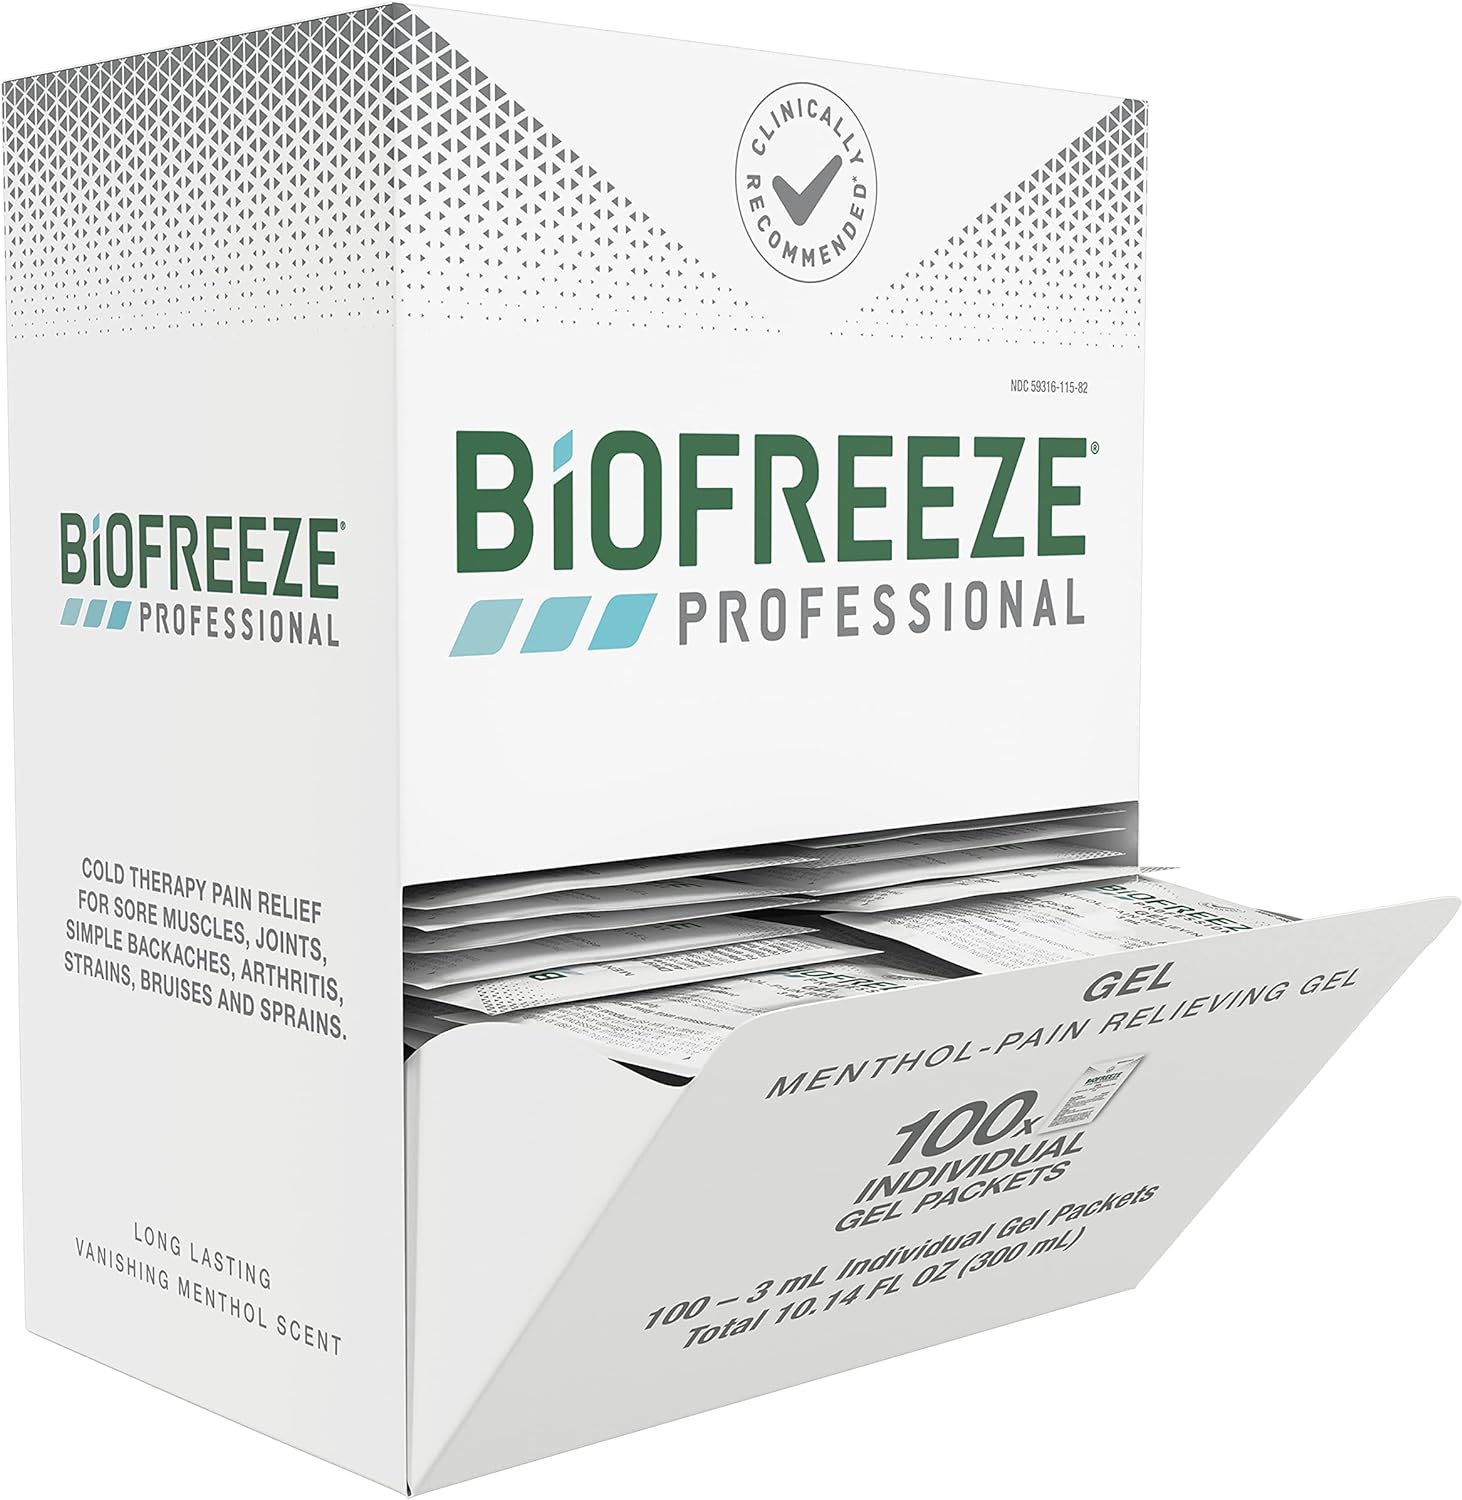 Biofreeze Professional Strength Pain Relief Gel, Arthritis Pain Reliver, Knee & Lower Back Pain Relief, Sore Muscle Relief, Neck Pain Relief, 100 Count (3ml Biofreeze Menthol Gel Packet)